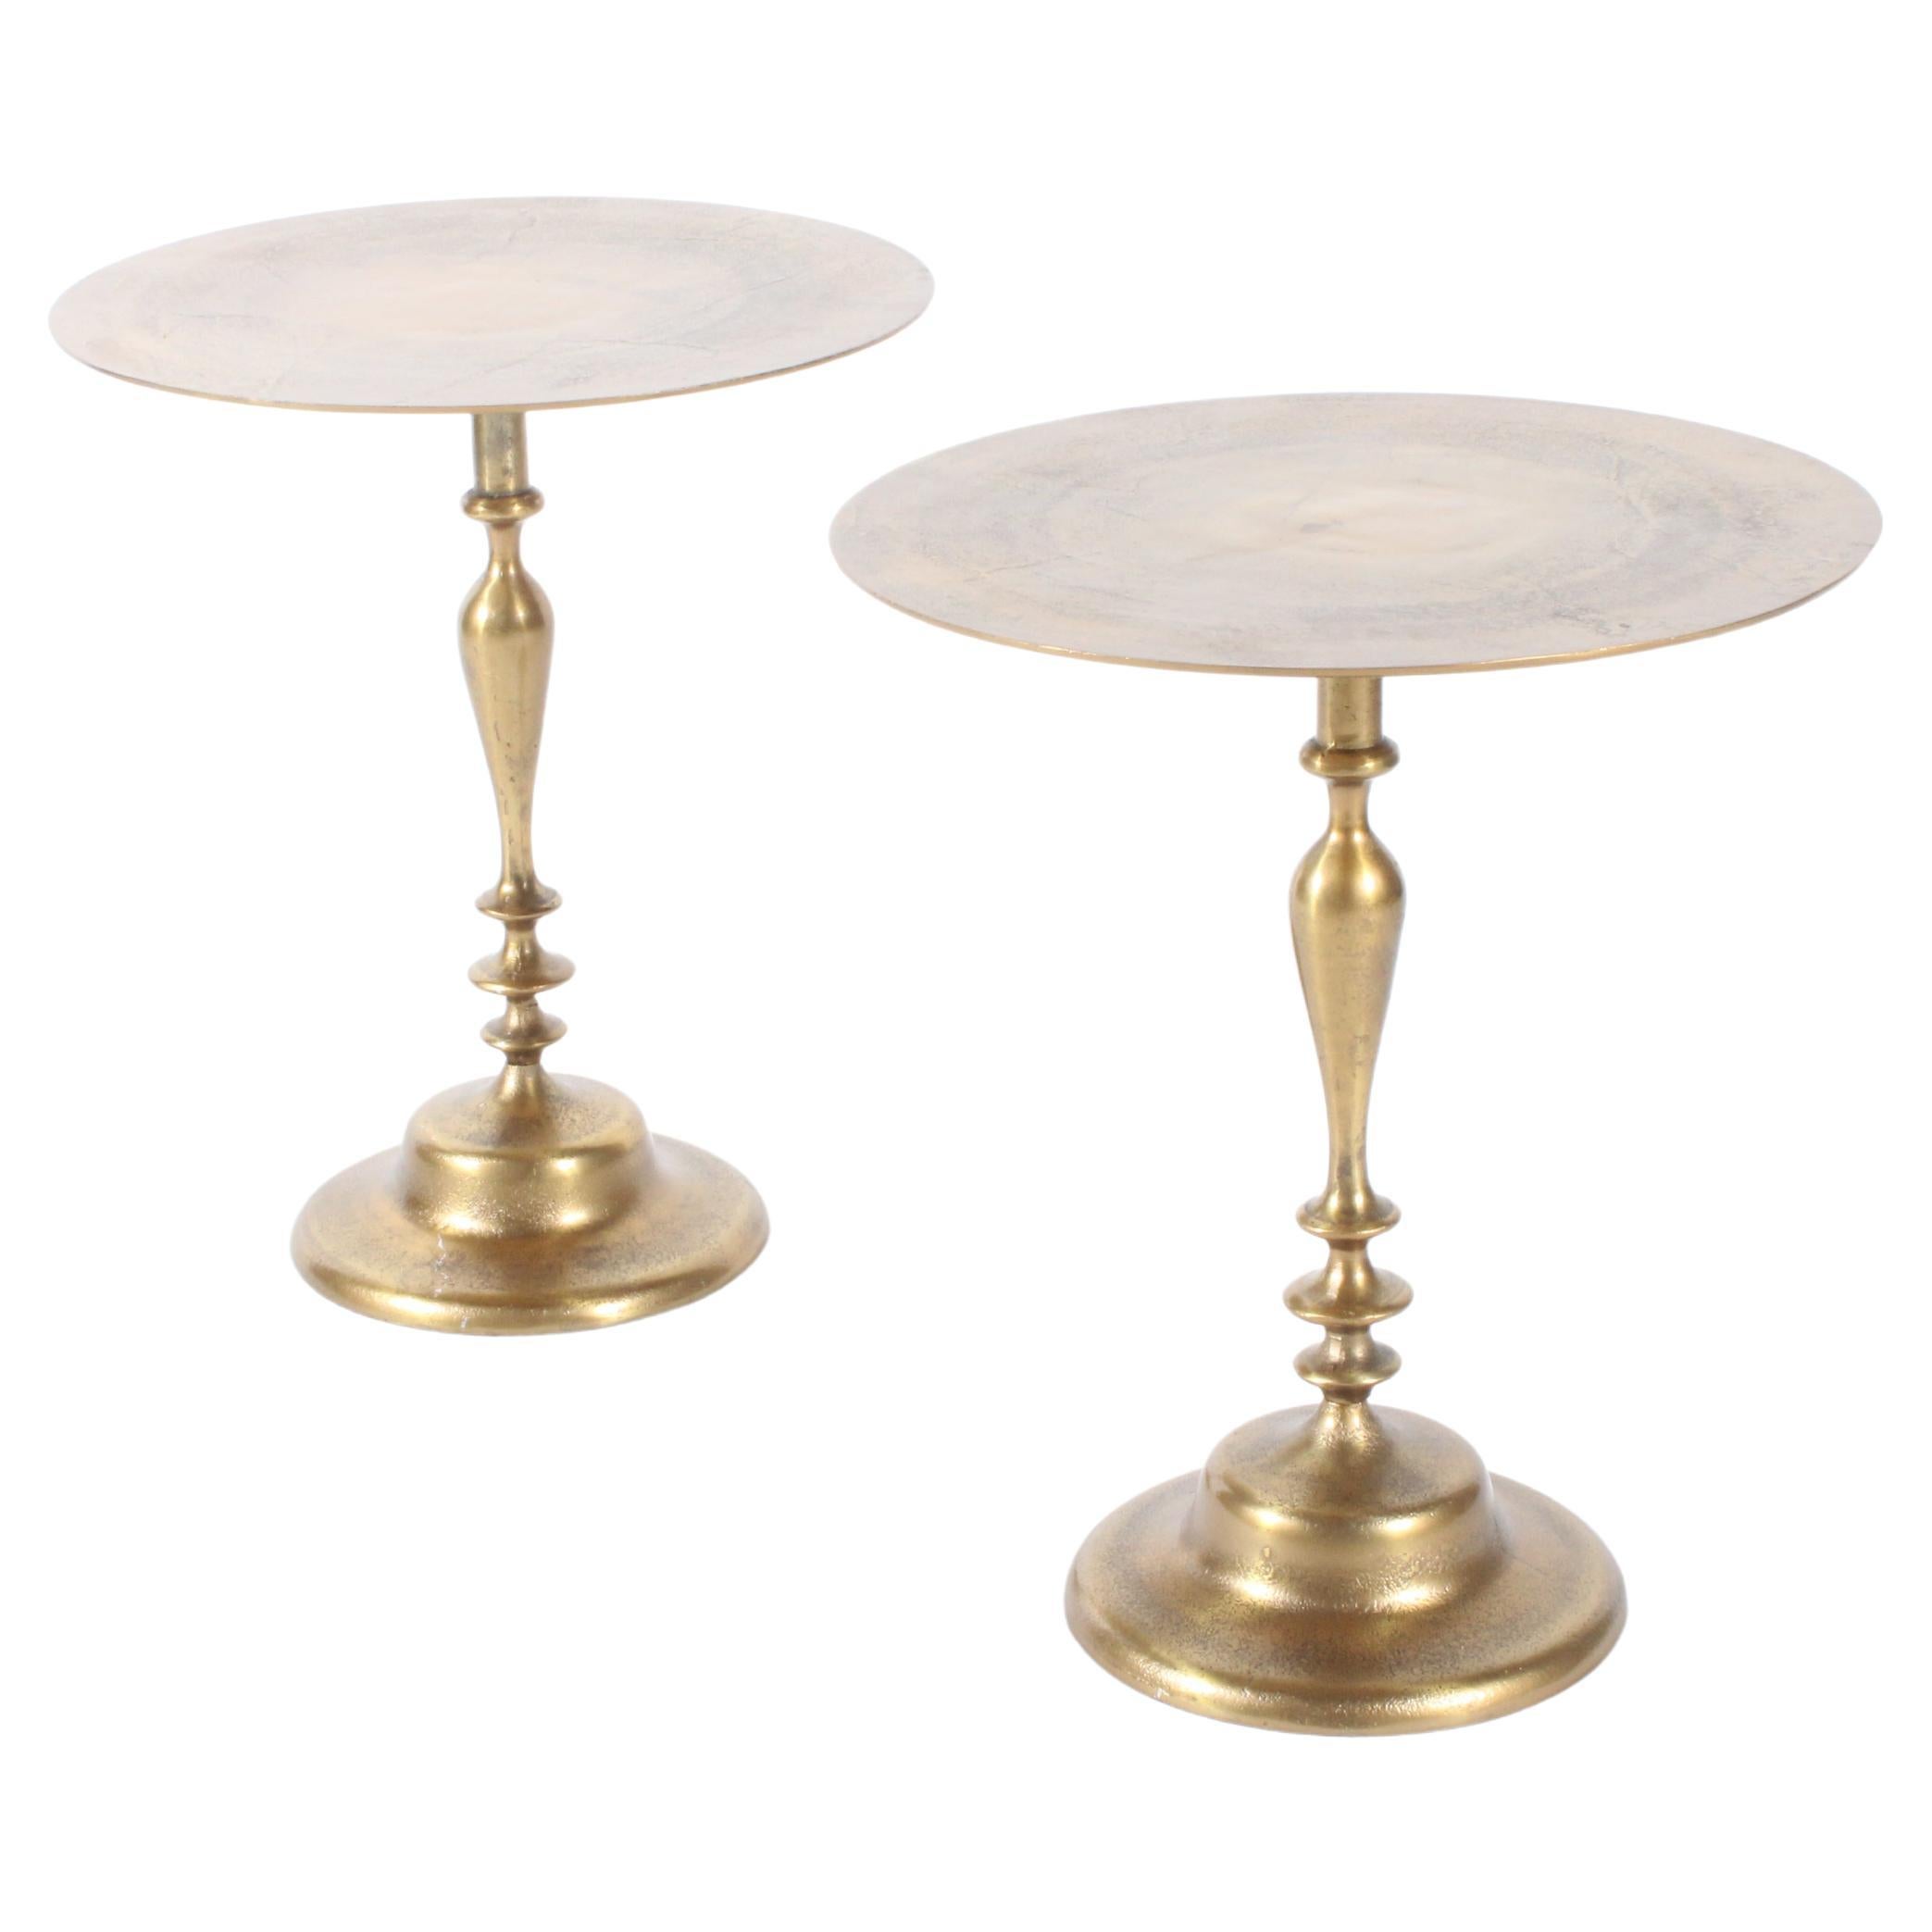 Historic Side Tables From The Ritz Hotel Paris *Free Worldwide Delivery For Sale